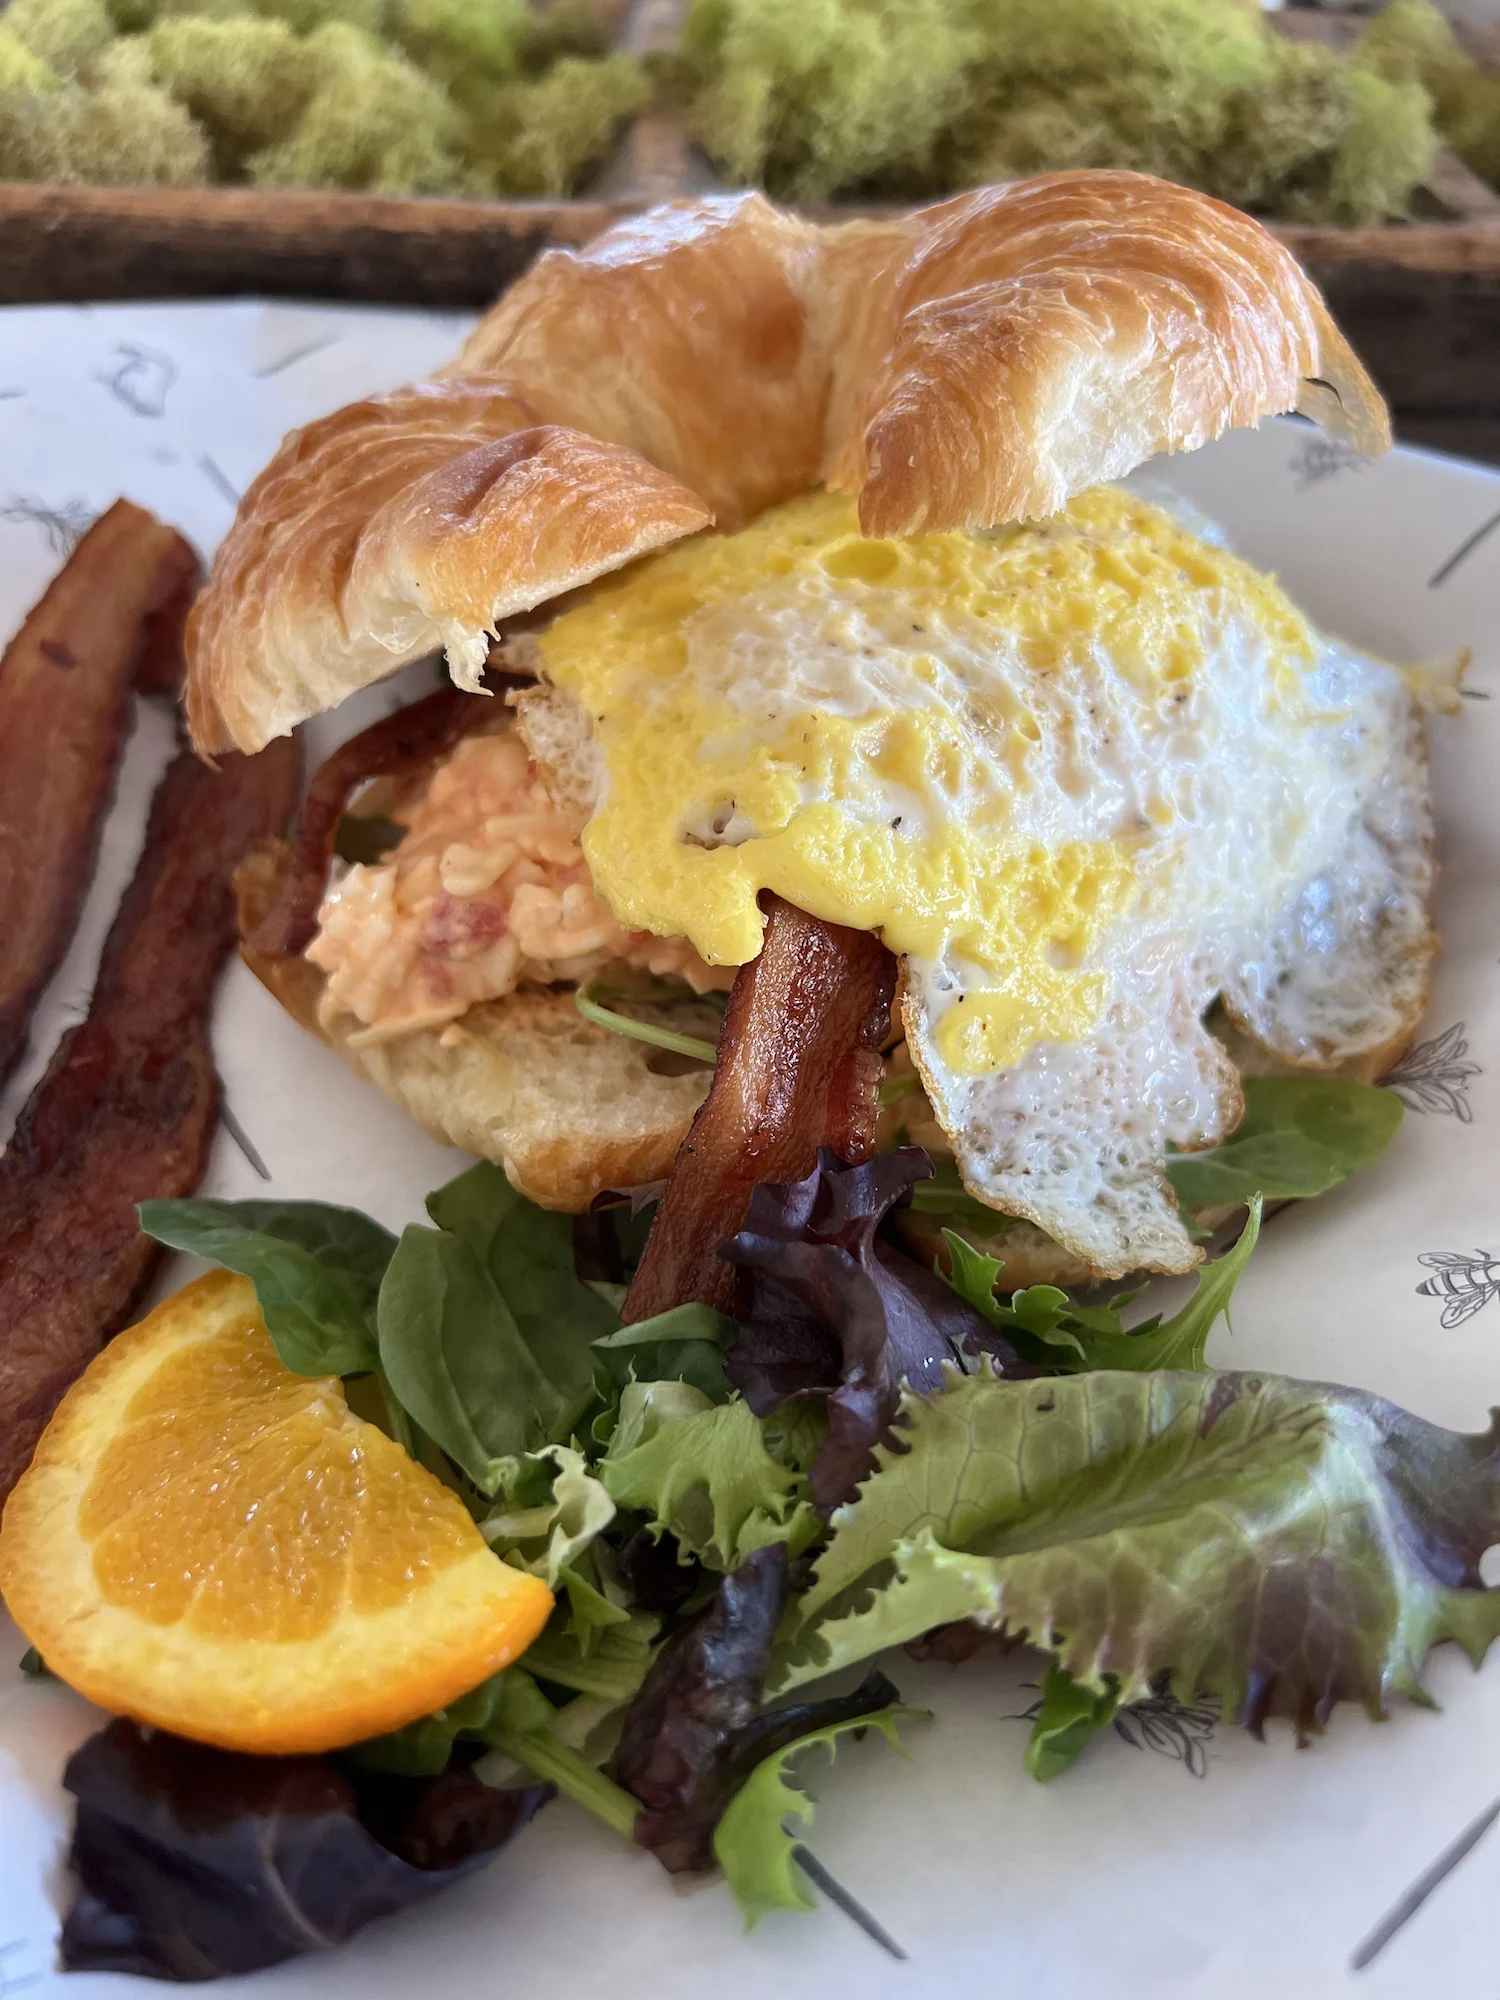 pimento cheese and fried egg on a croissant with orange slice and salad on plate nearby